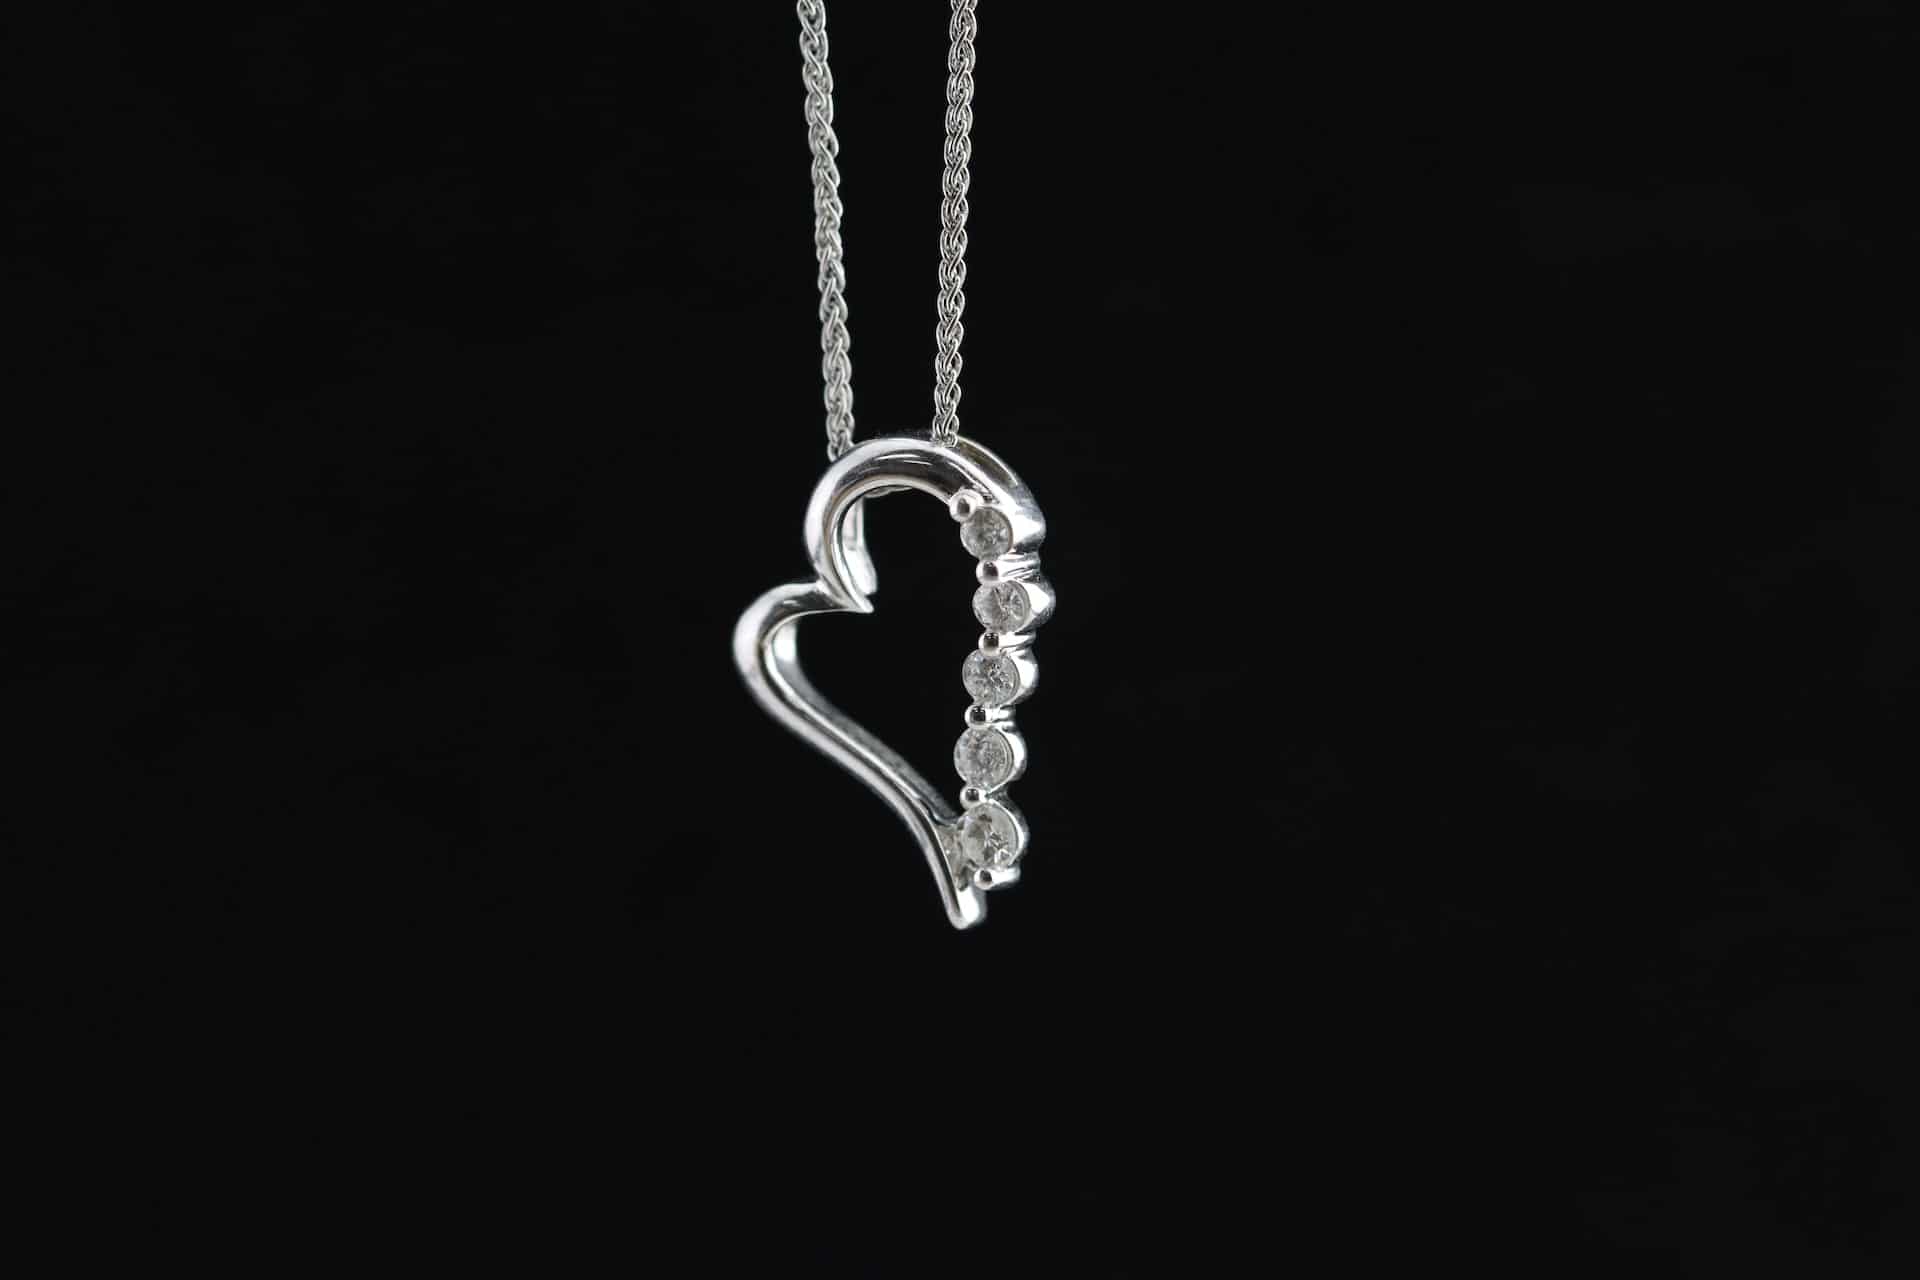 Stylish and Timeless: The Silver Heart Pendant Necklace!